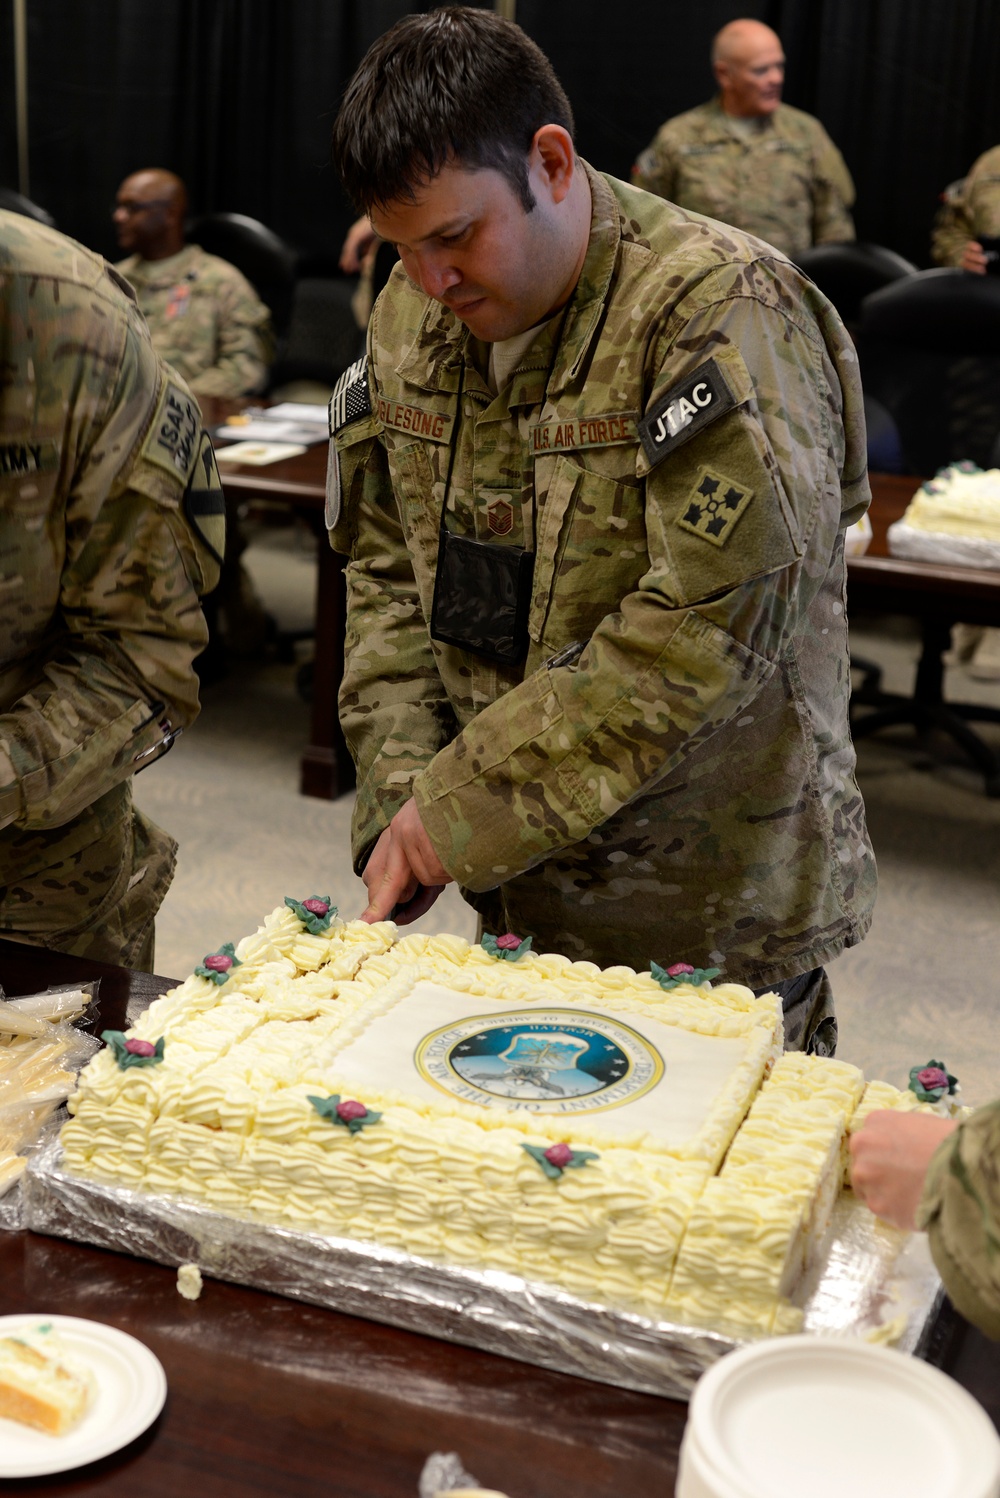 RC-South celebrates Air Force birthday